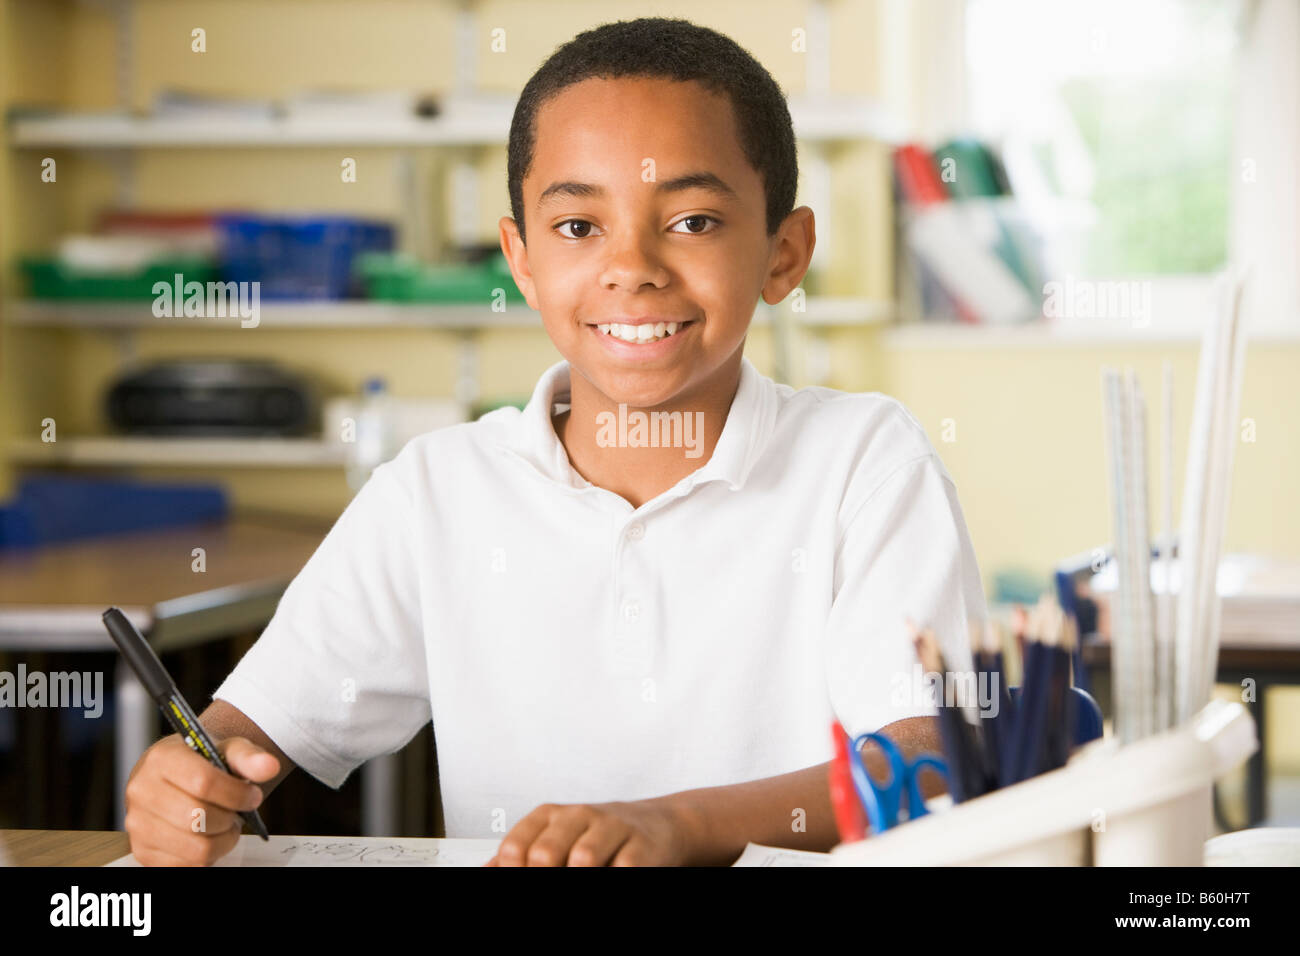 Student in class taking notes Stock Photo